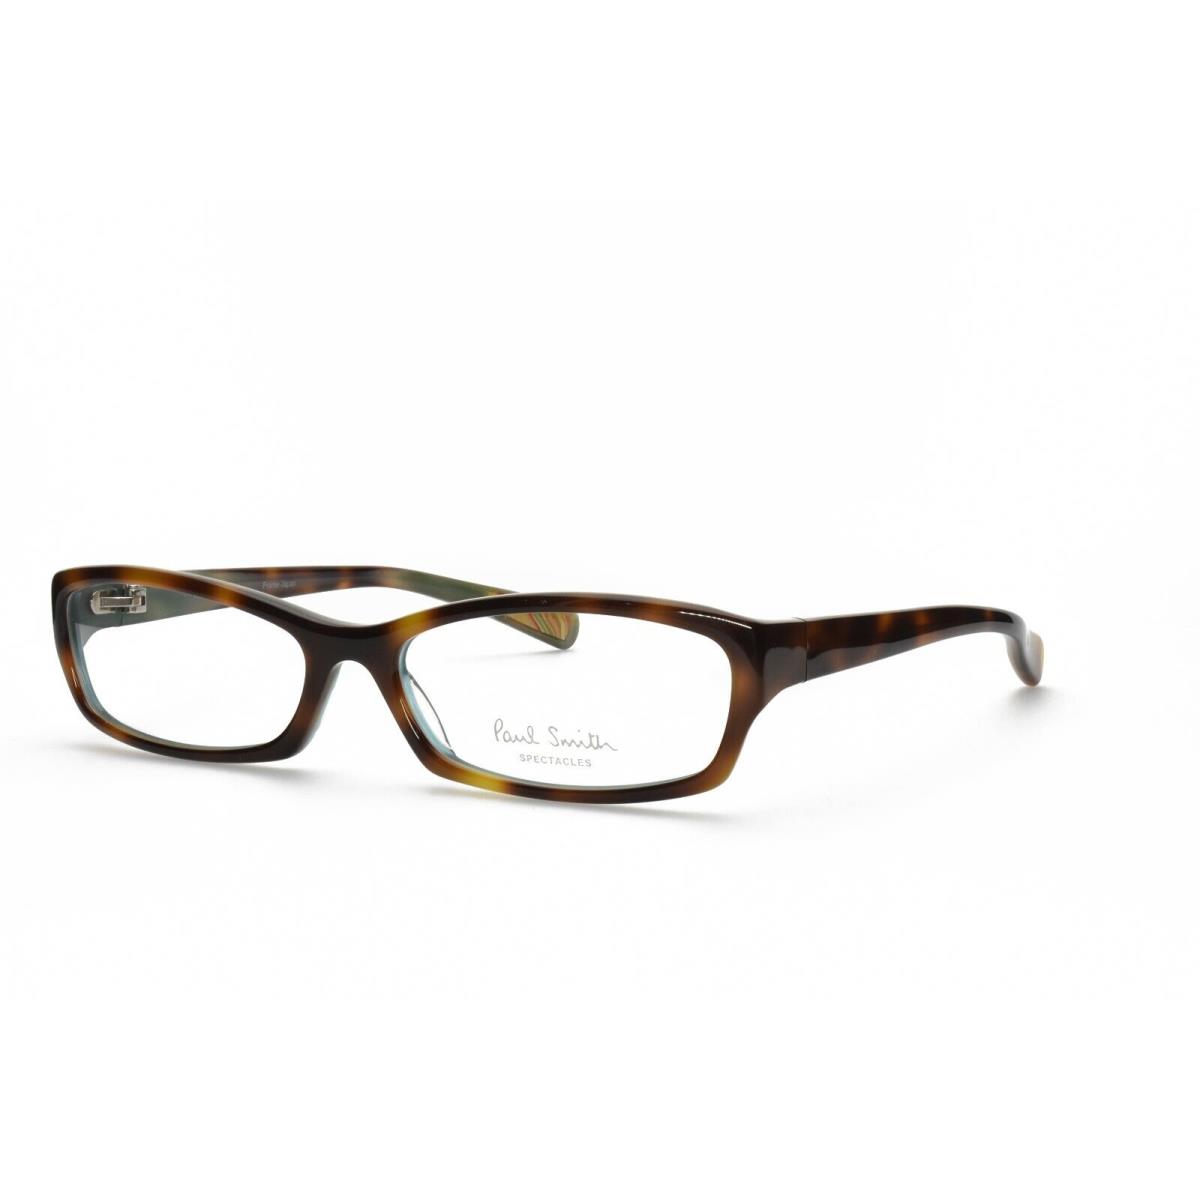 Paul Smith PS 298 Dmaq Eyeglasses Frames Only 55-16-130